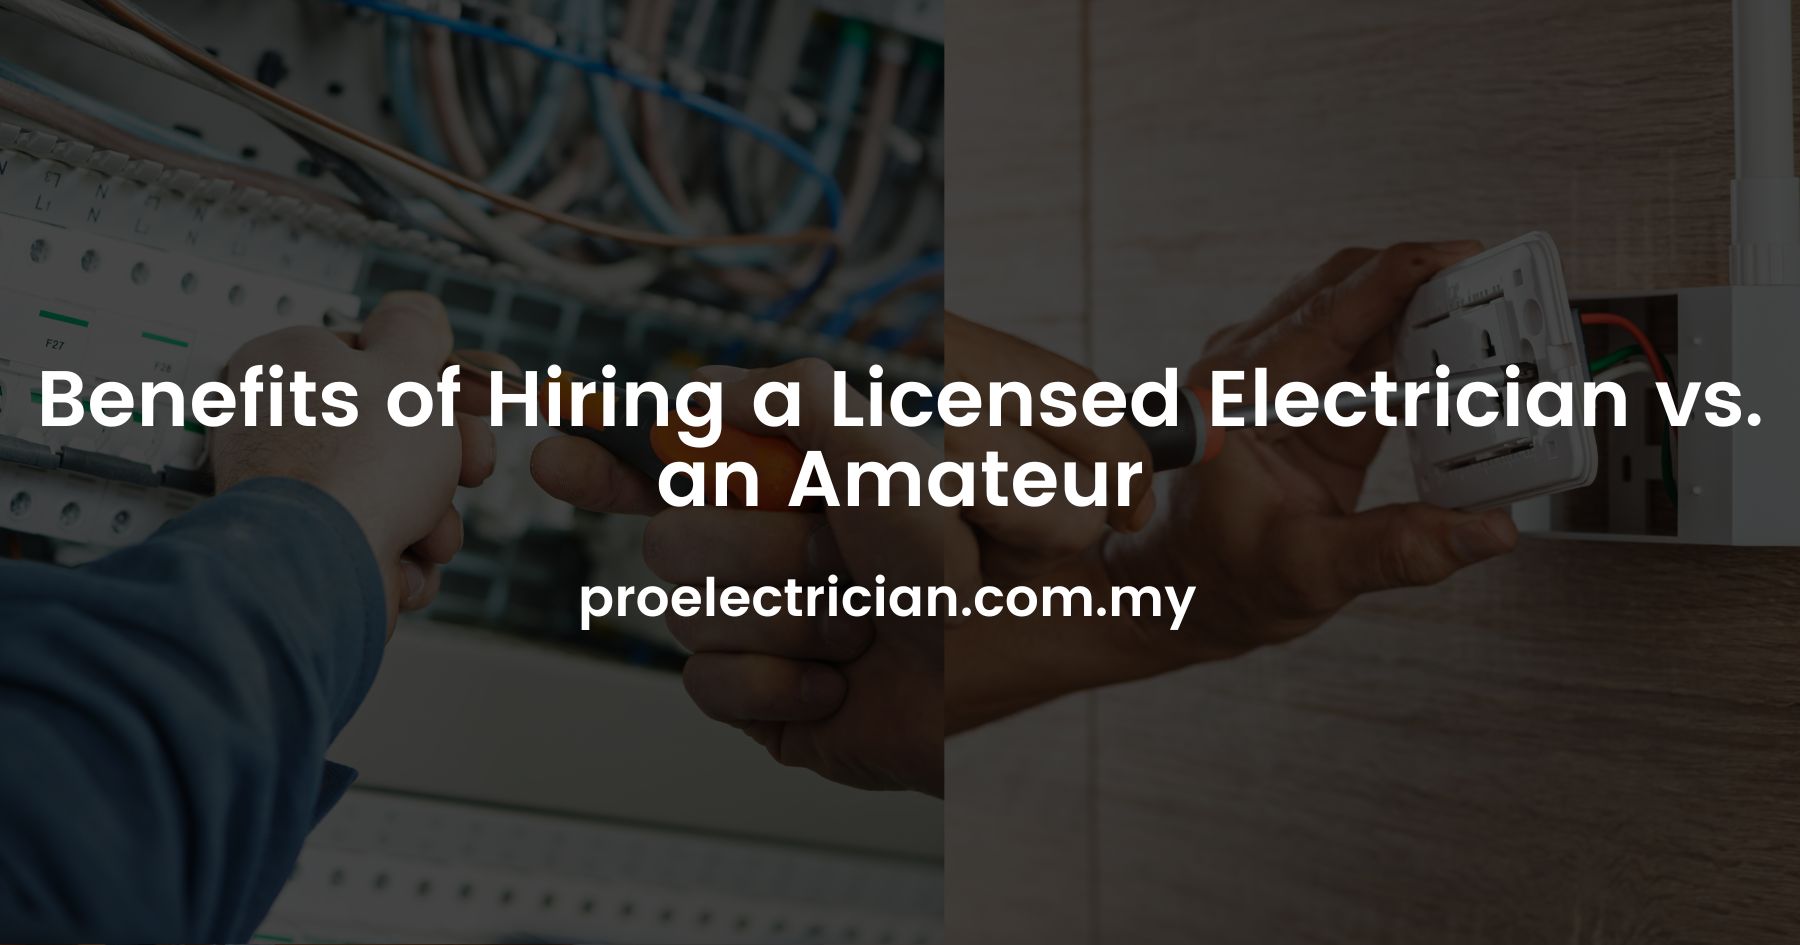 Benefits of Hiring a Licensed Electrician vs. an Amateur